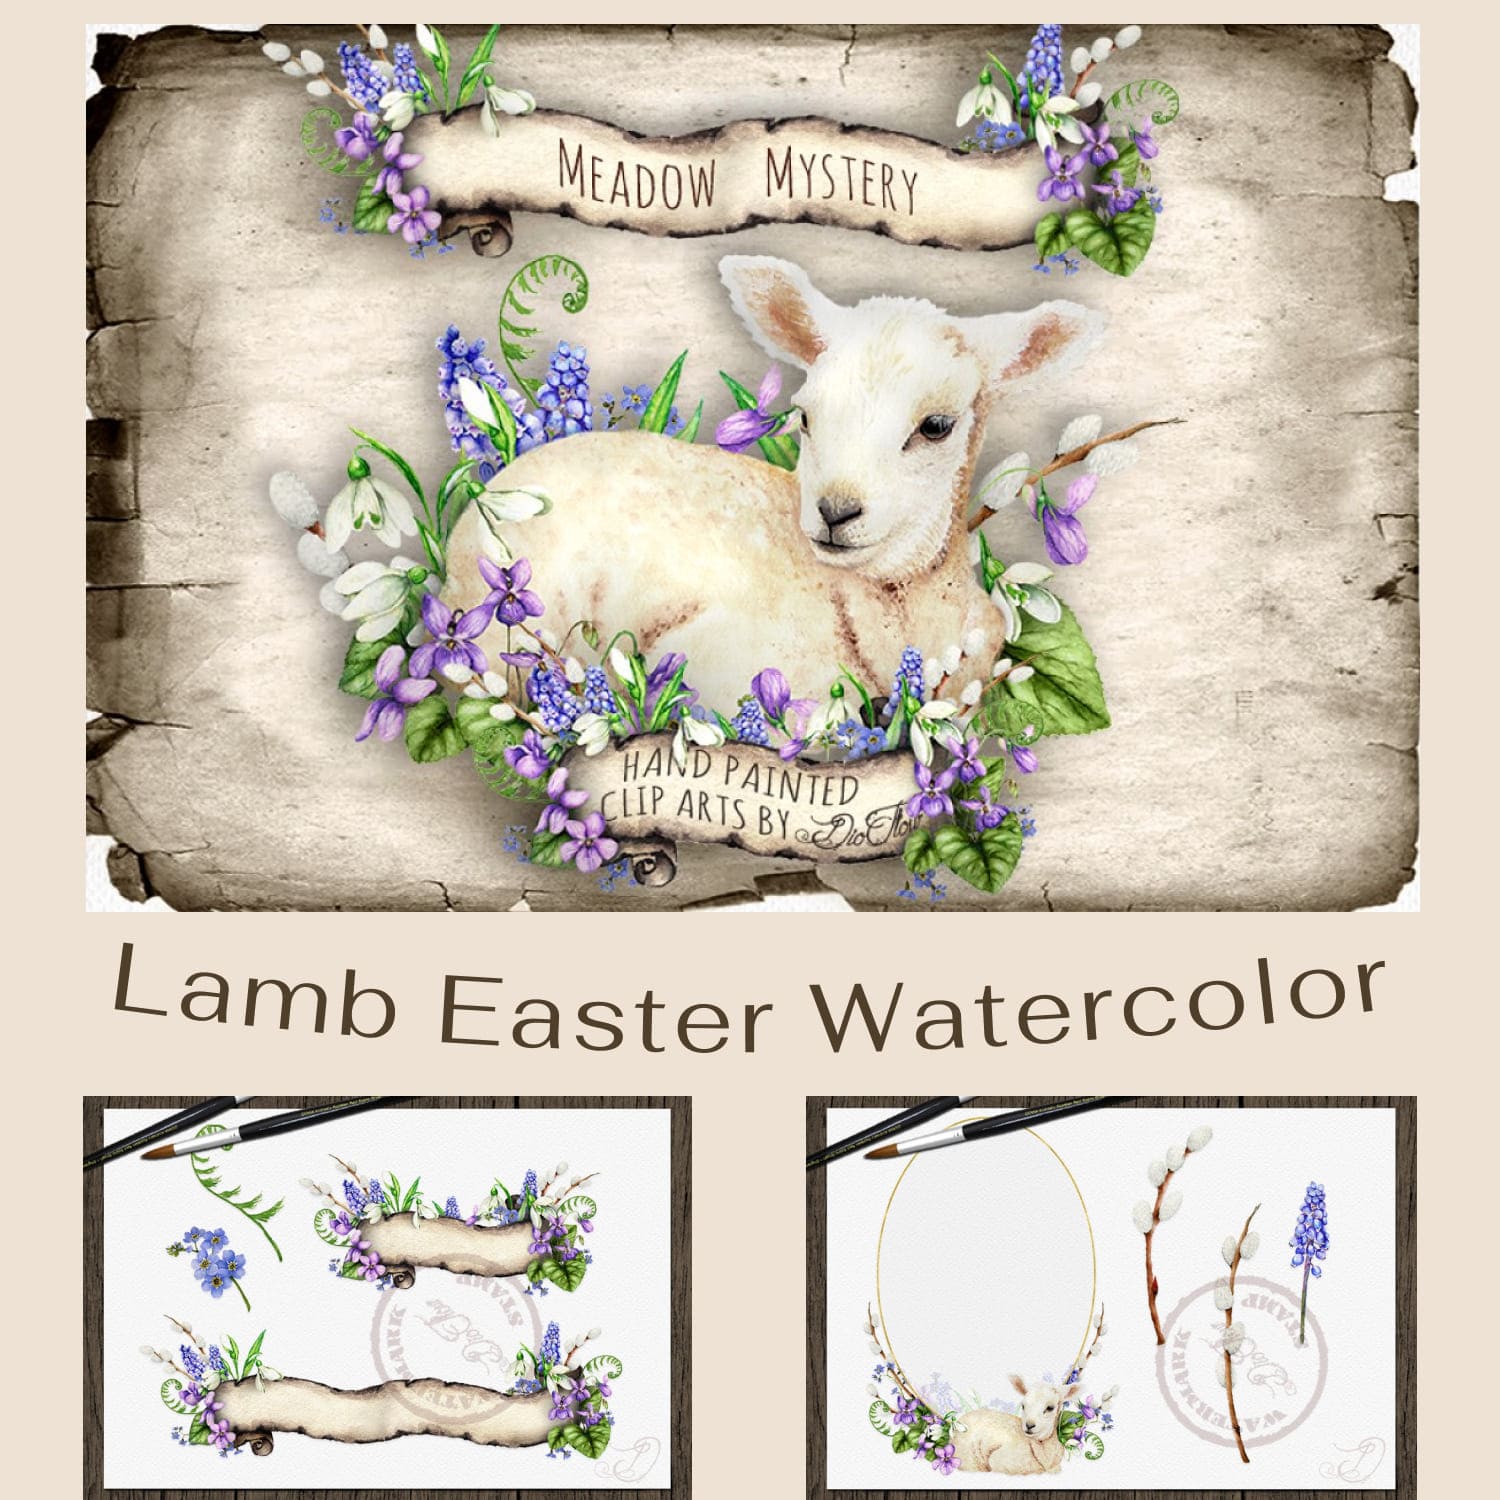 Watercolor drawing of the Easter Lamb 1500x1500.